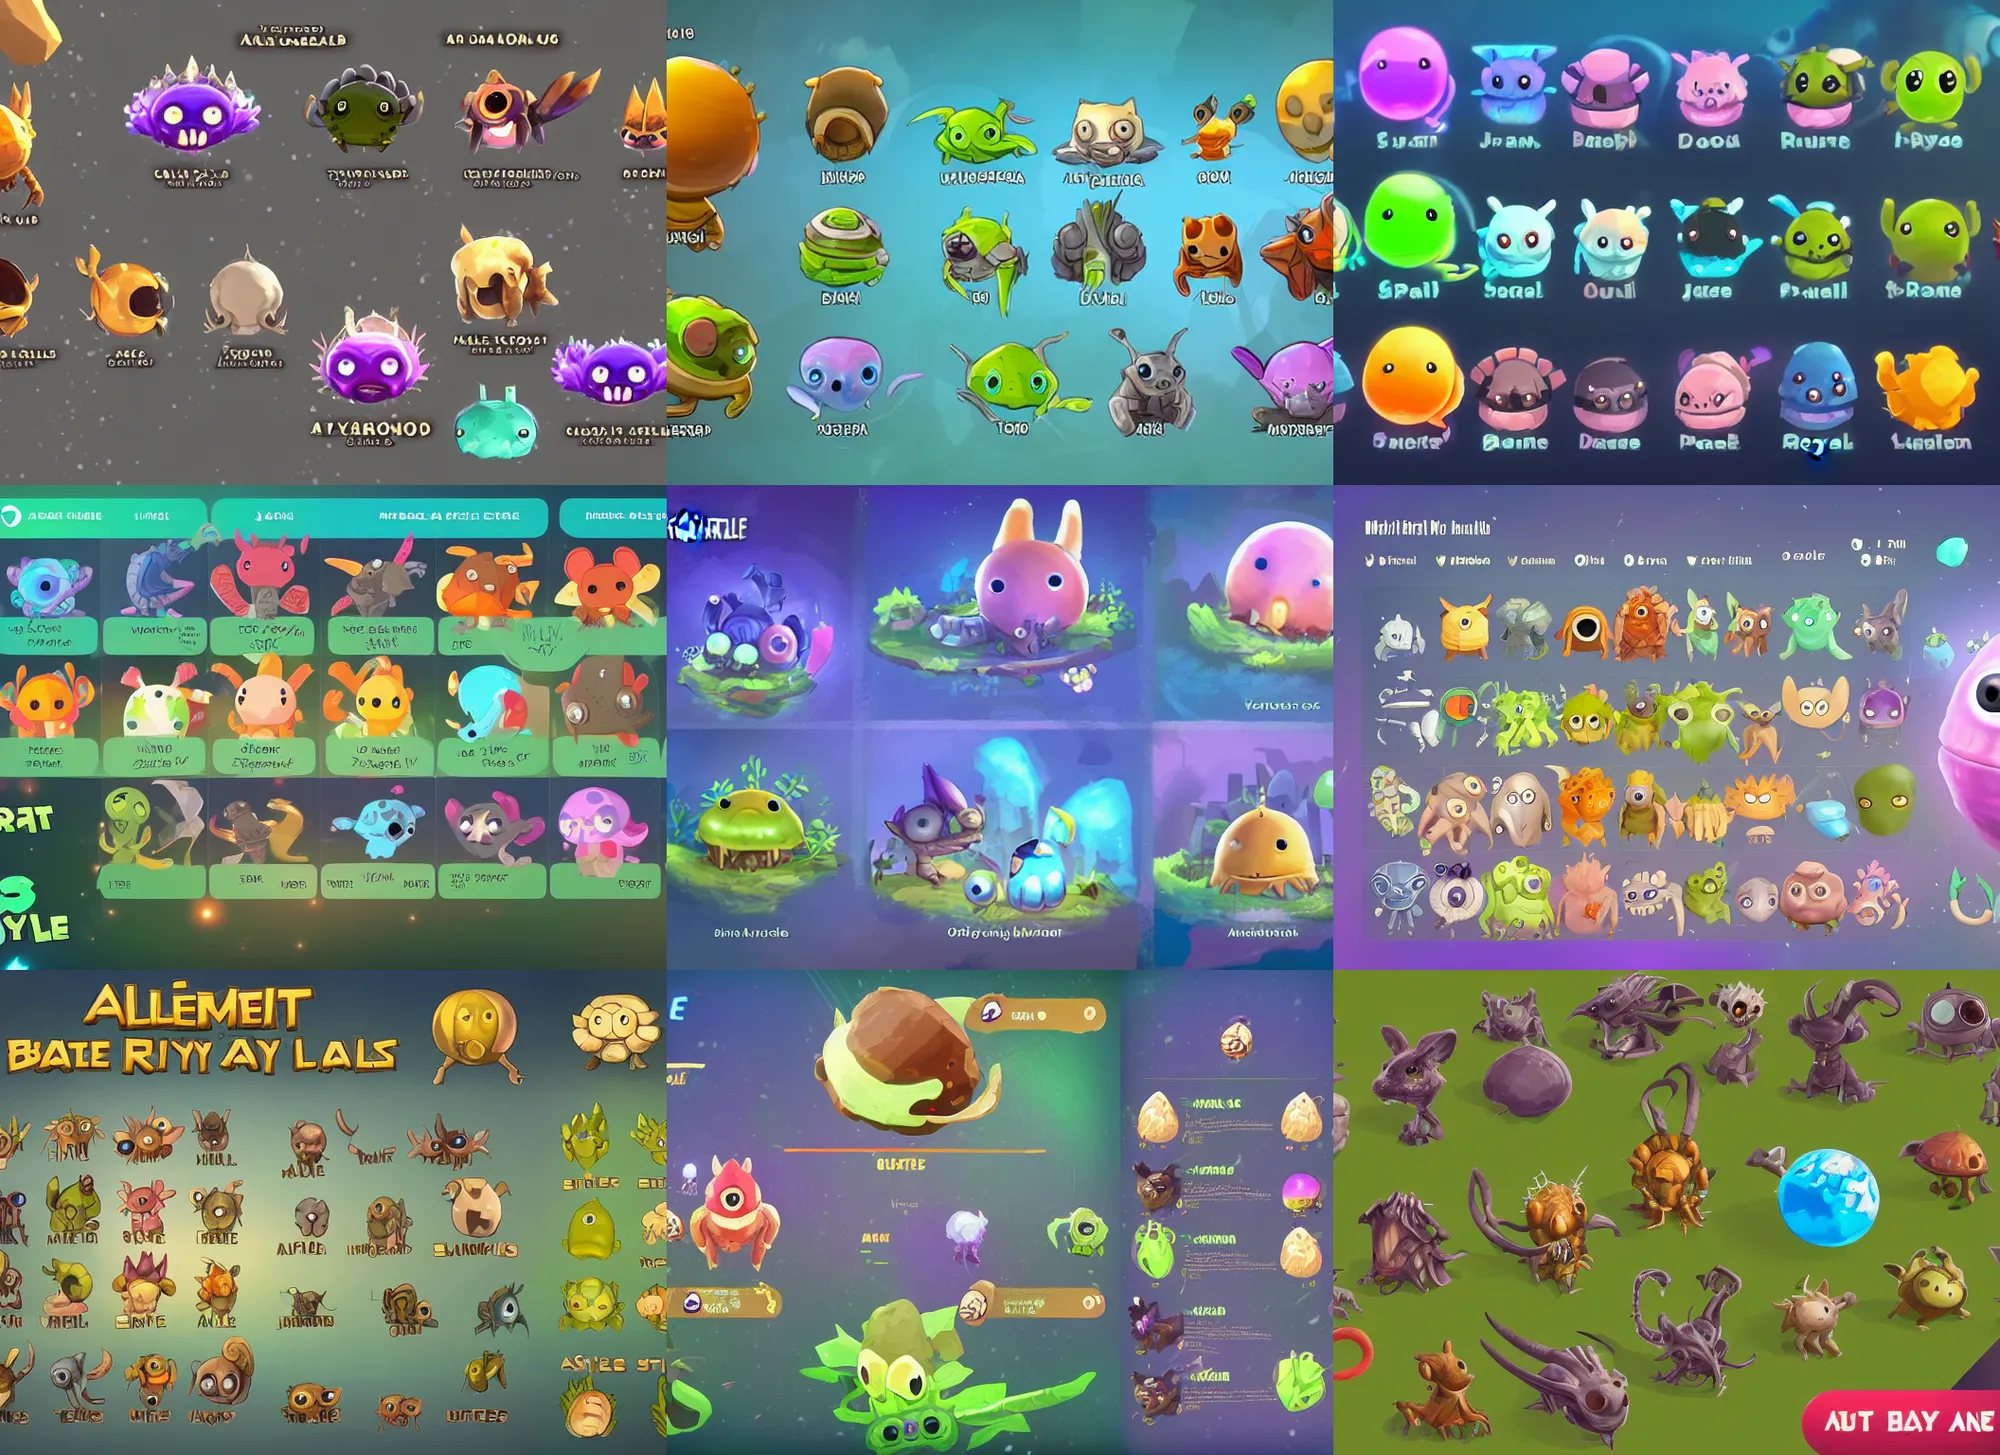 Prompt: a character menu for mobile battle royale game about alien cute little animals that land on a planet with different biomes, craters, alien capsules, bushes in the visual style of Spore and Eternal Cylinder